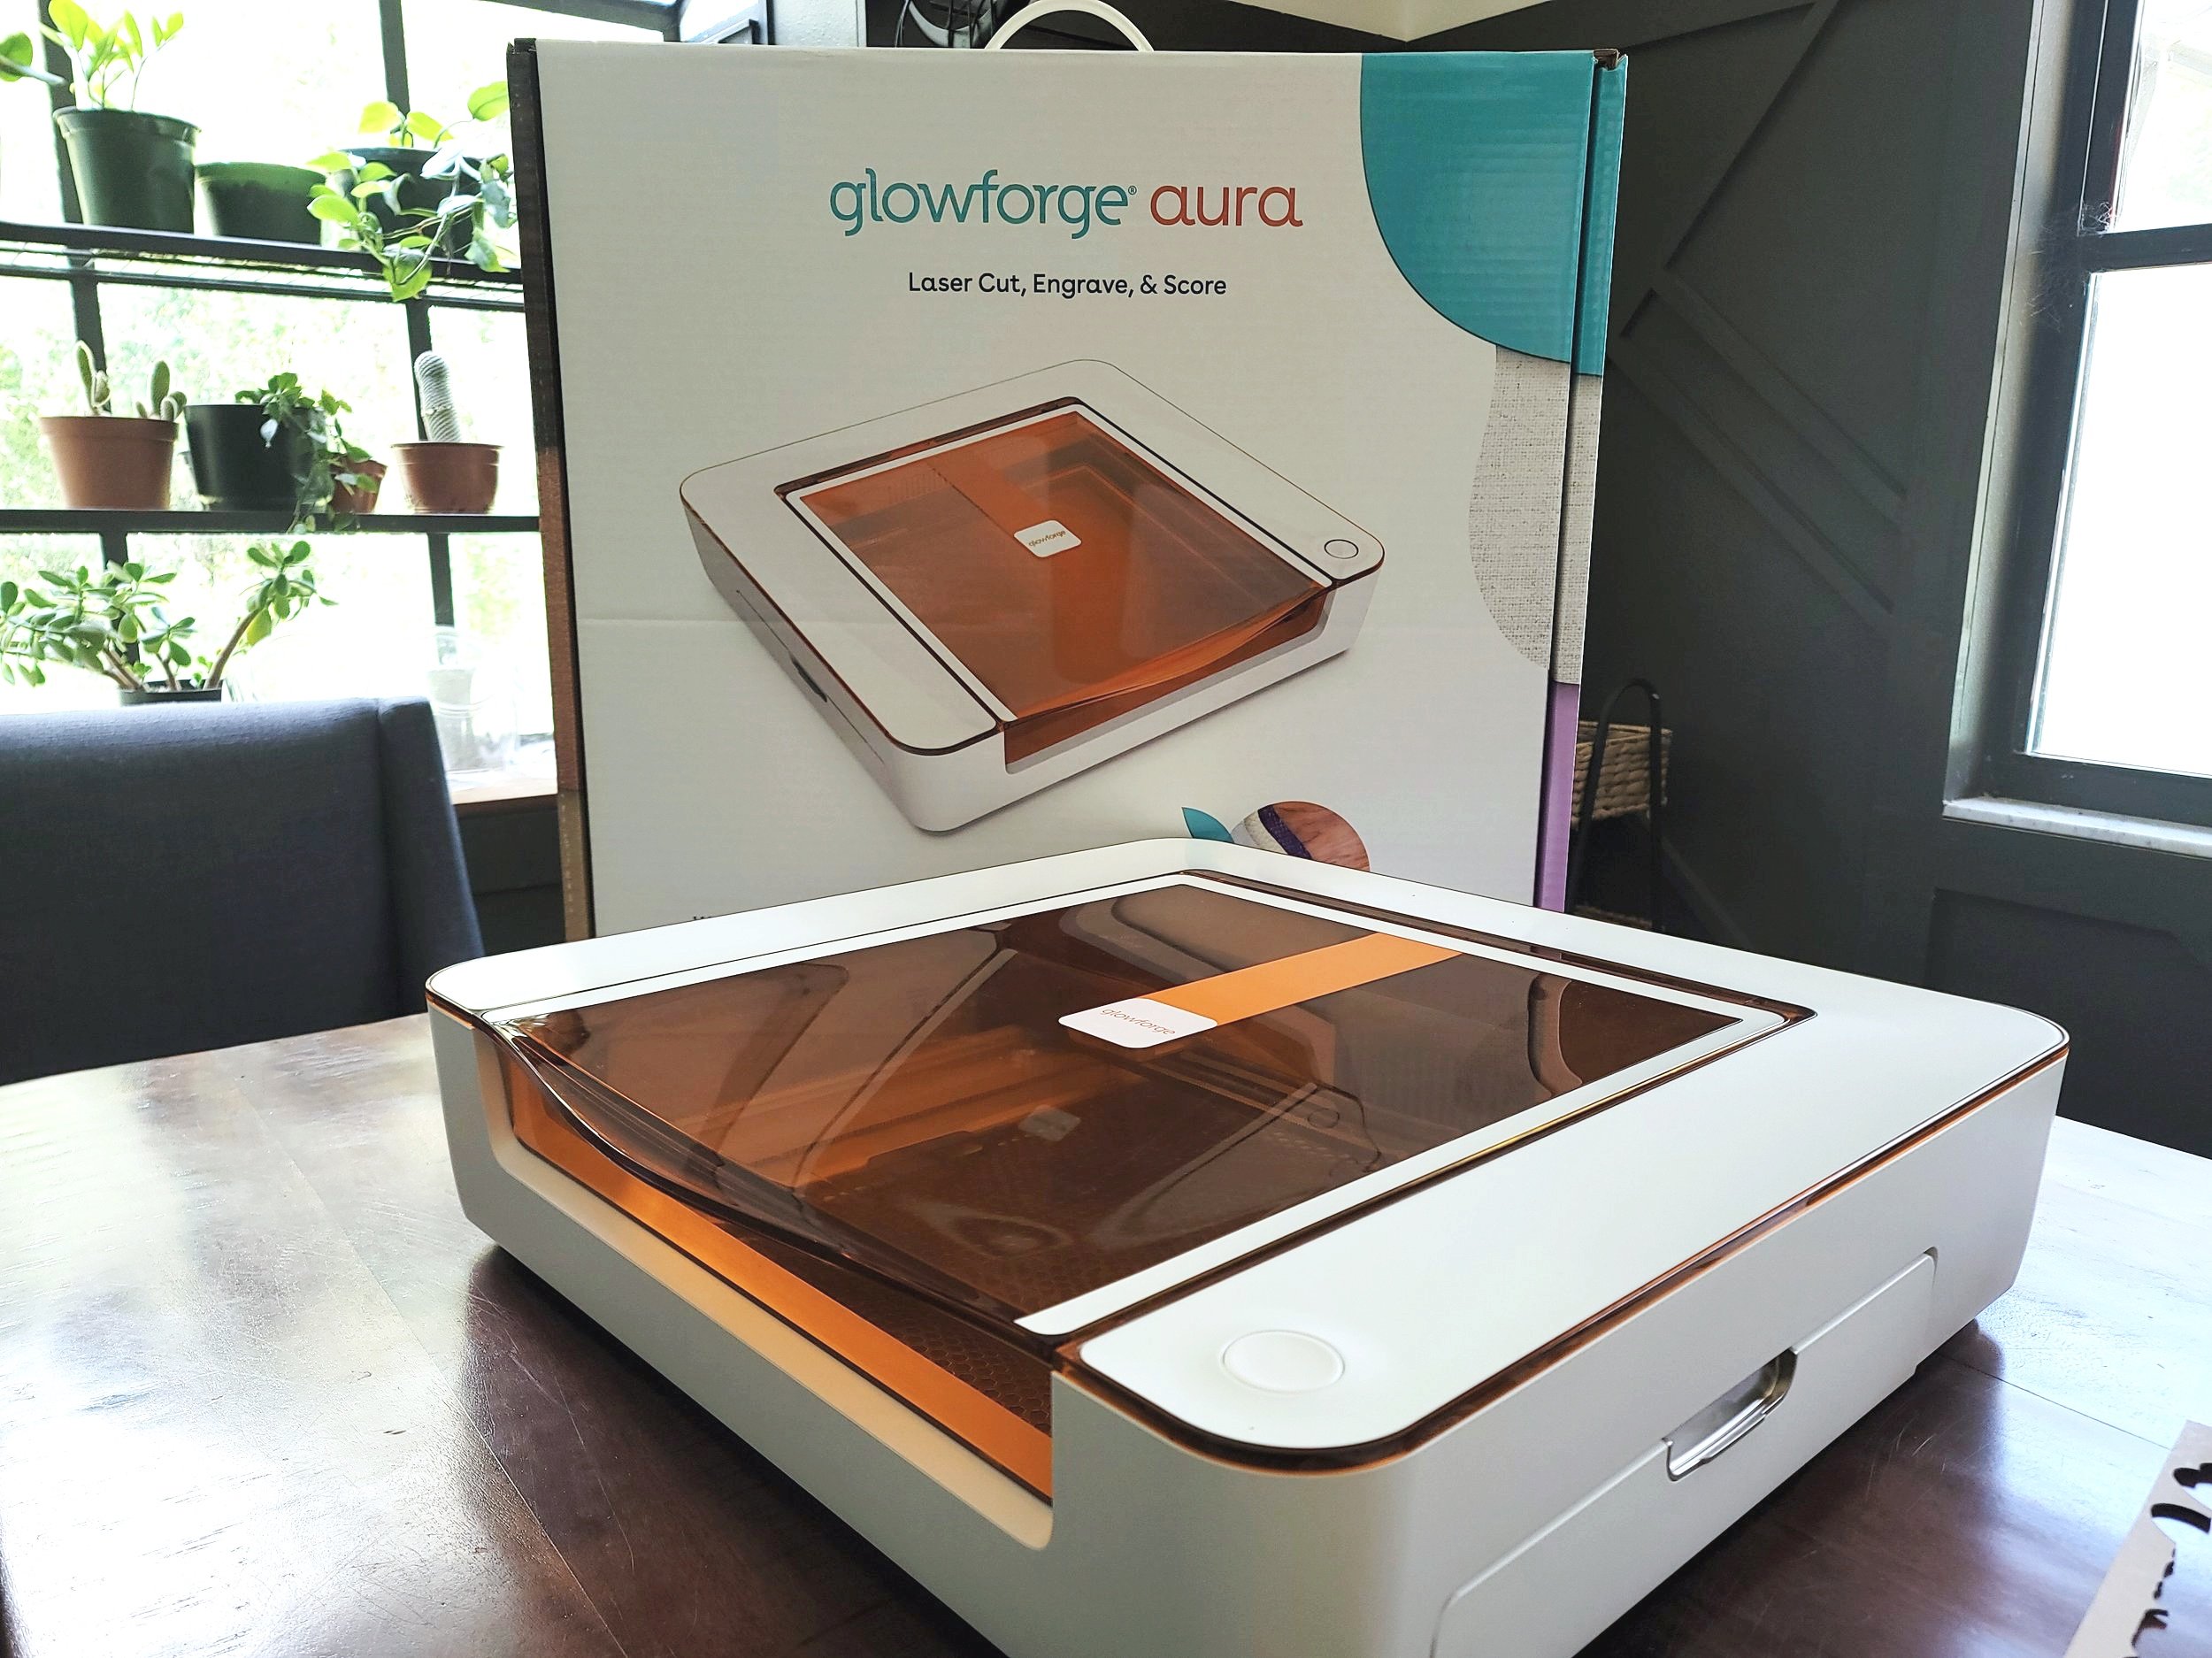 The NEW Glowforge Aura Craft Laser! Is it right for your craft